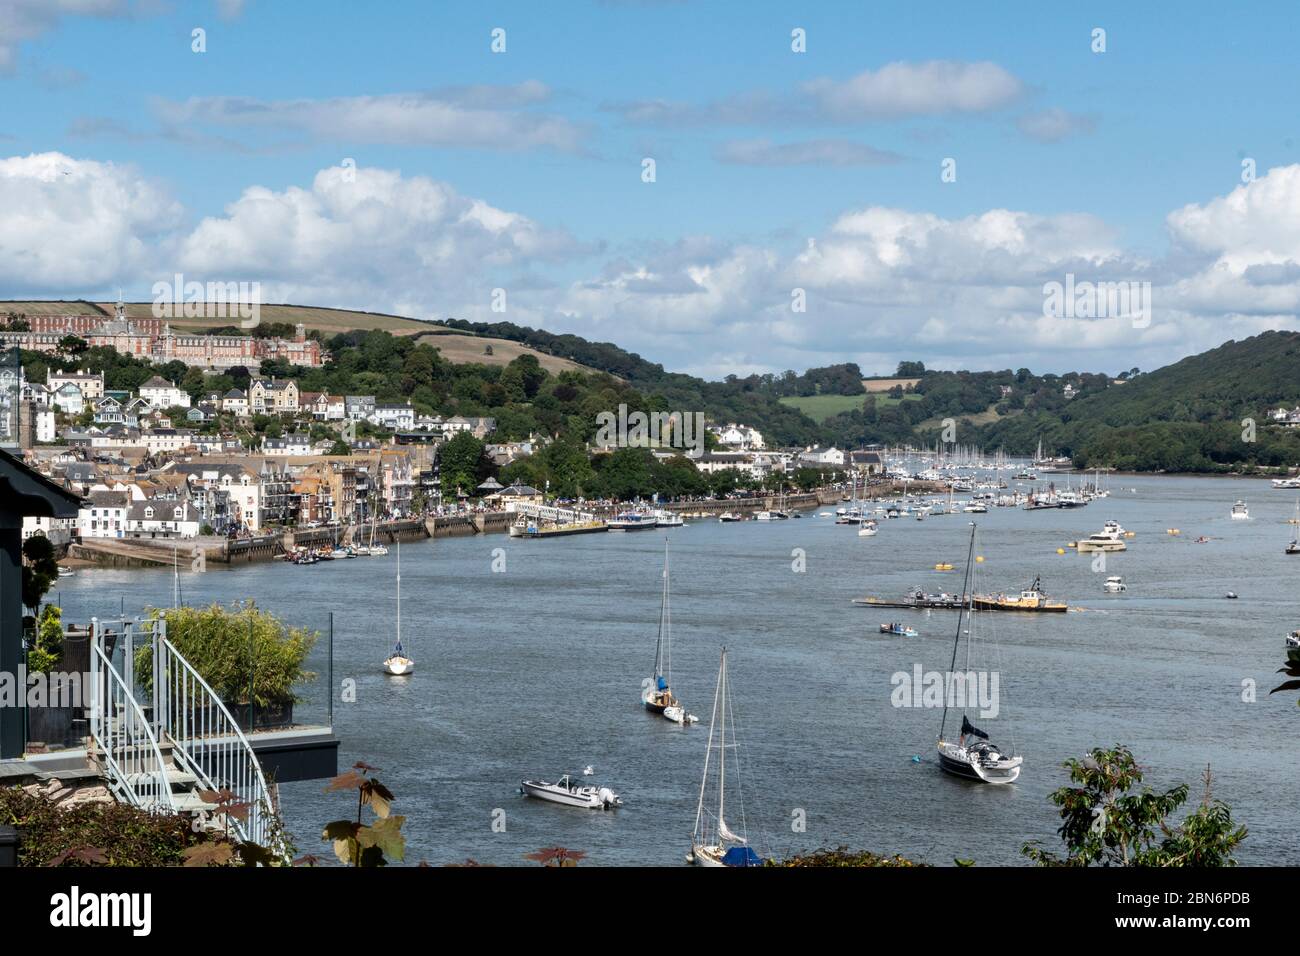 View looking towards Dartmouth Town centre / quayside and Britannia Royal Naval College On the top left above the town. Stock Photo